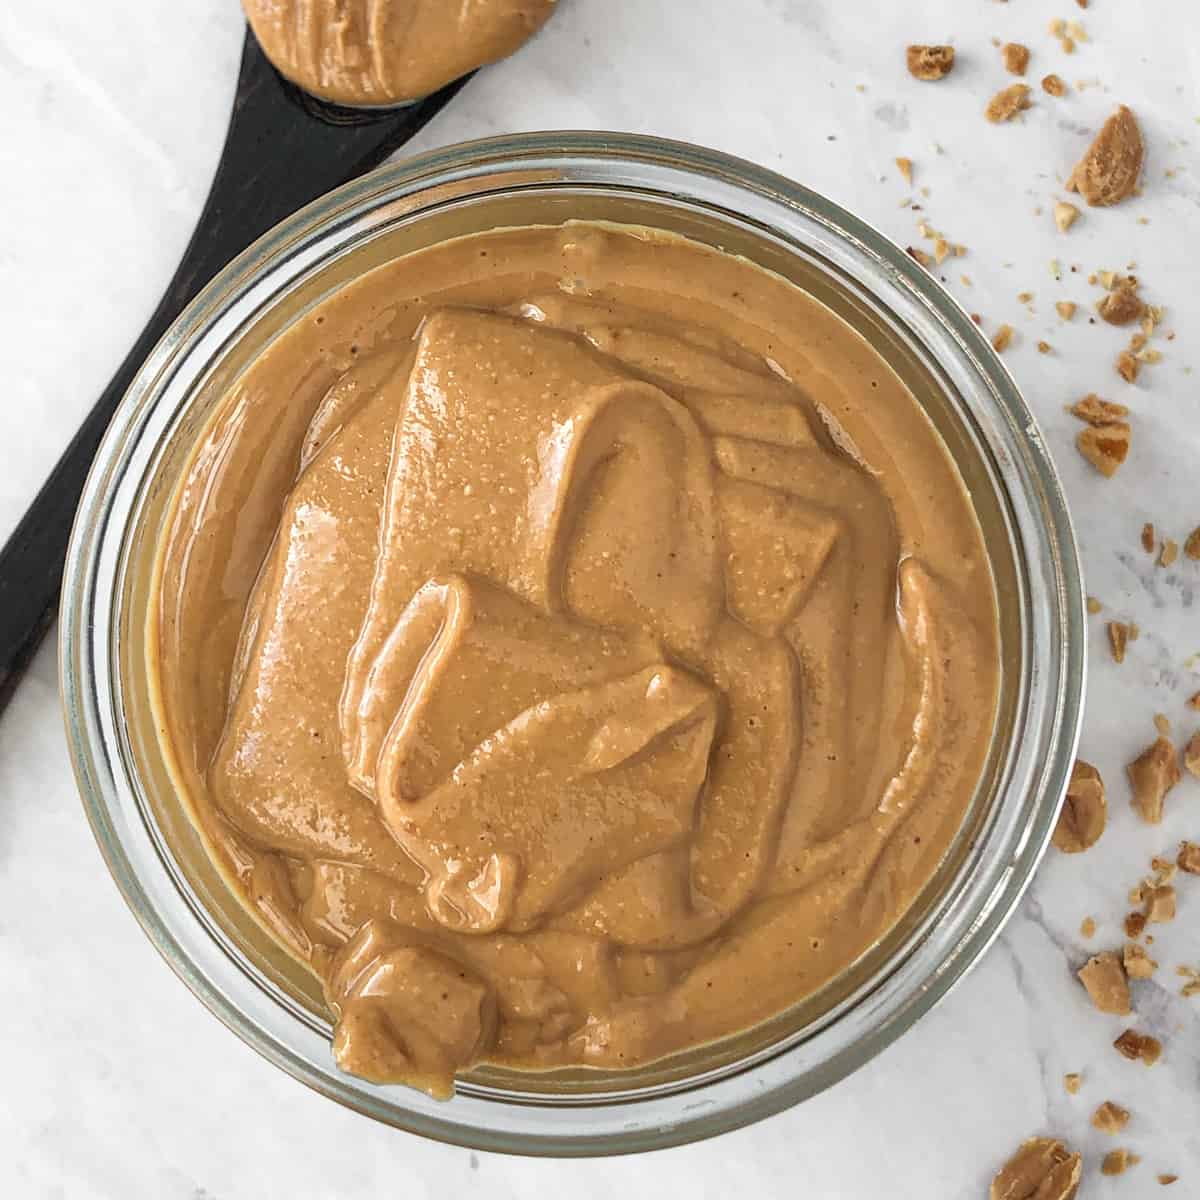 Tips for Stirring Natural Peanut Butter